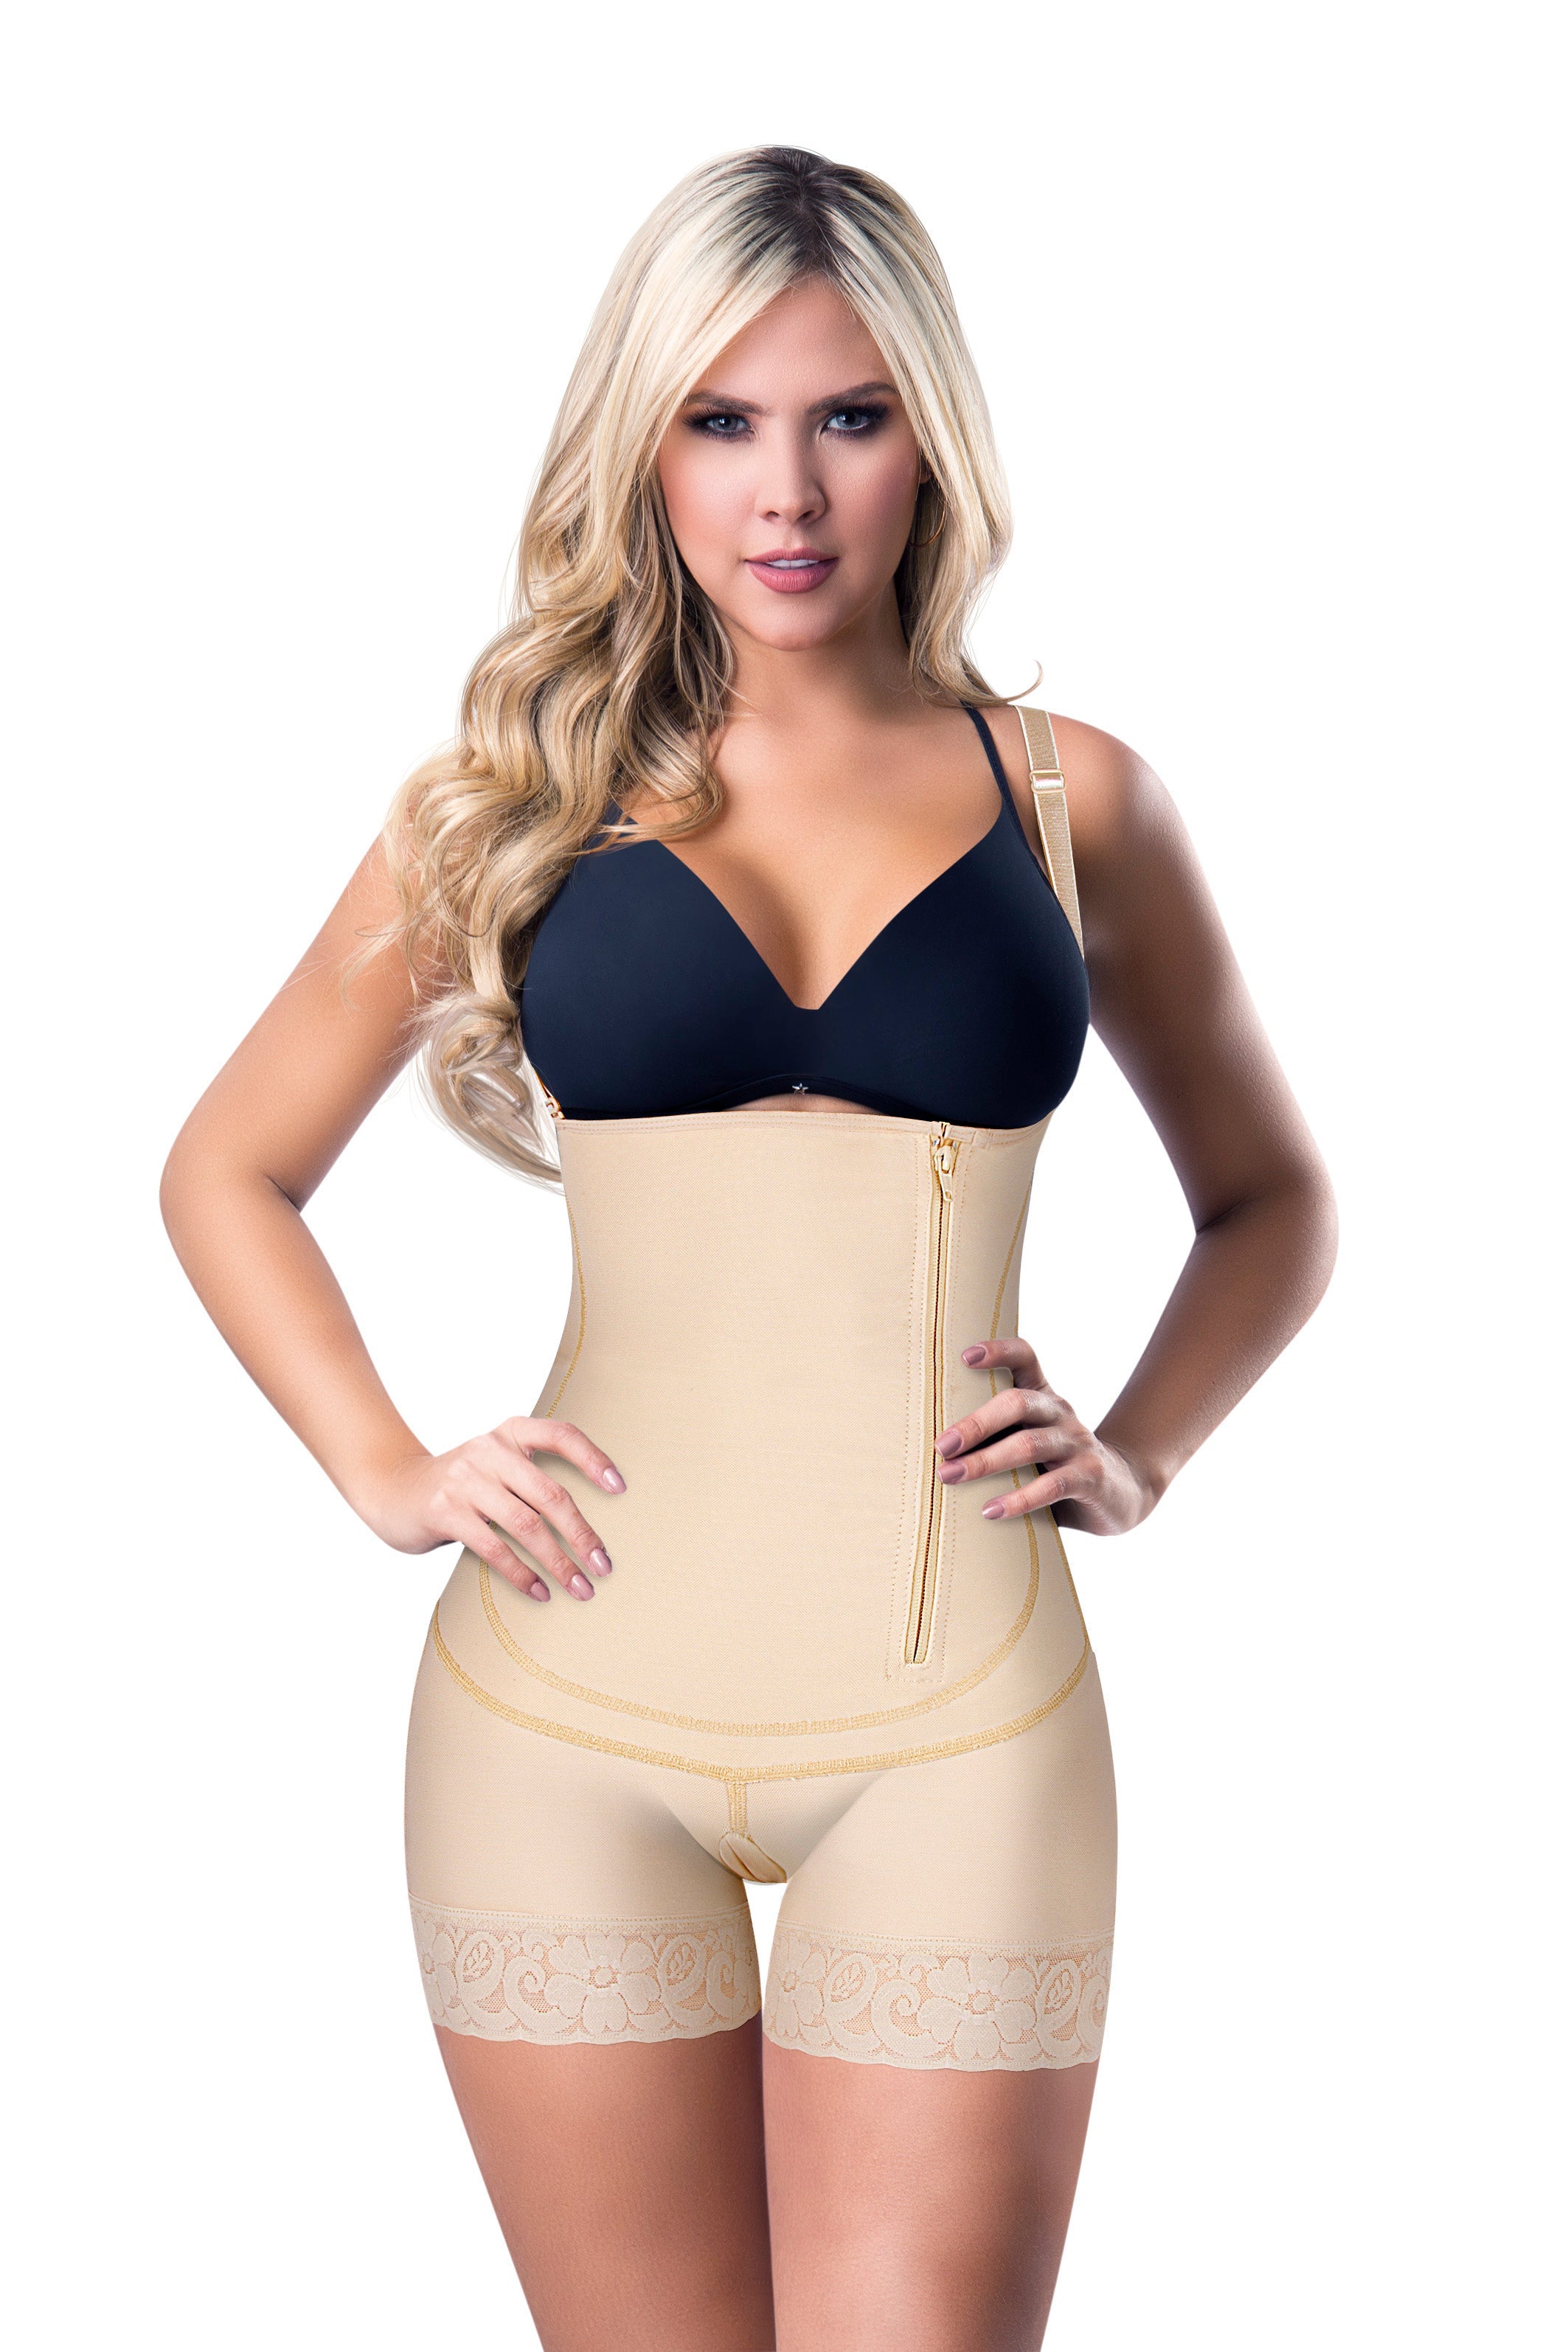 All Body Shapers